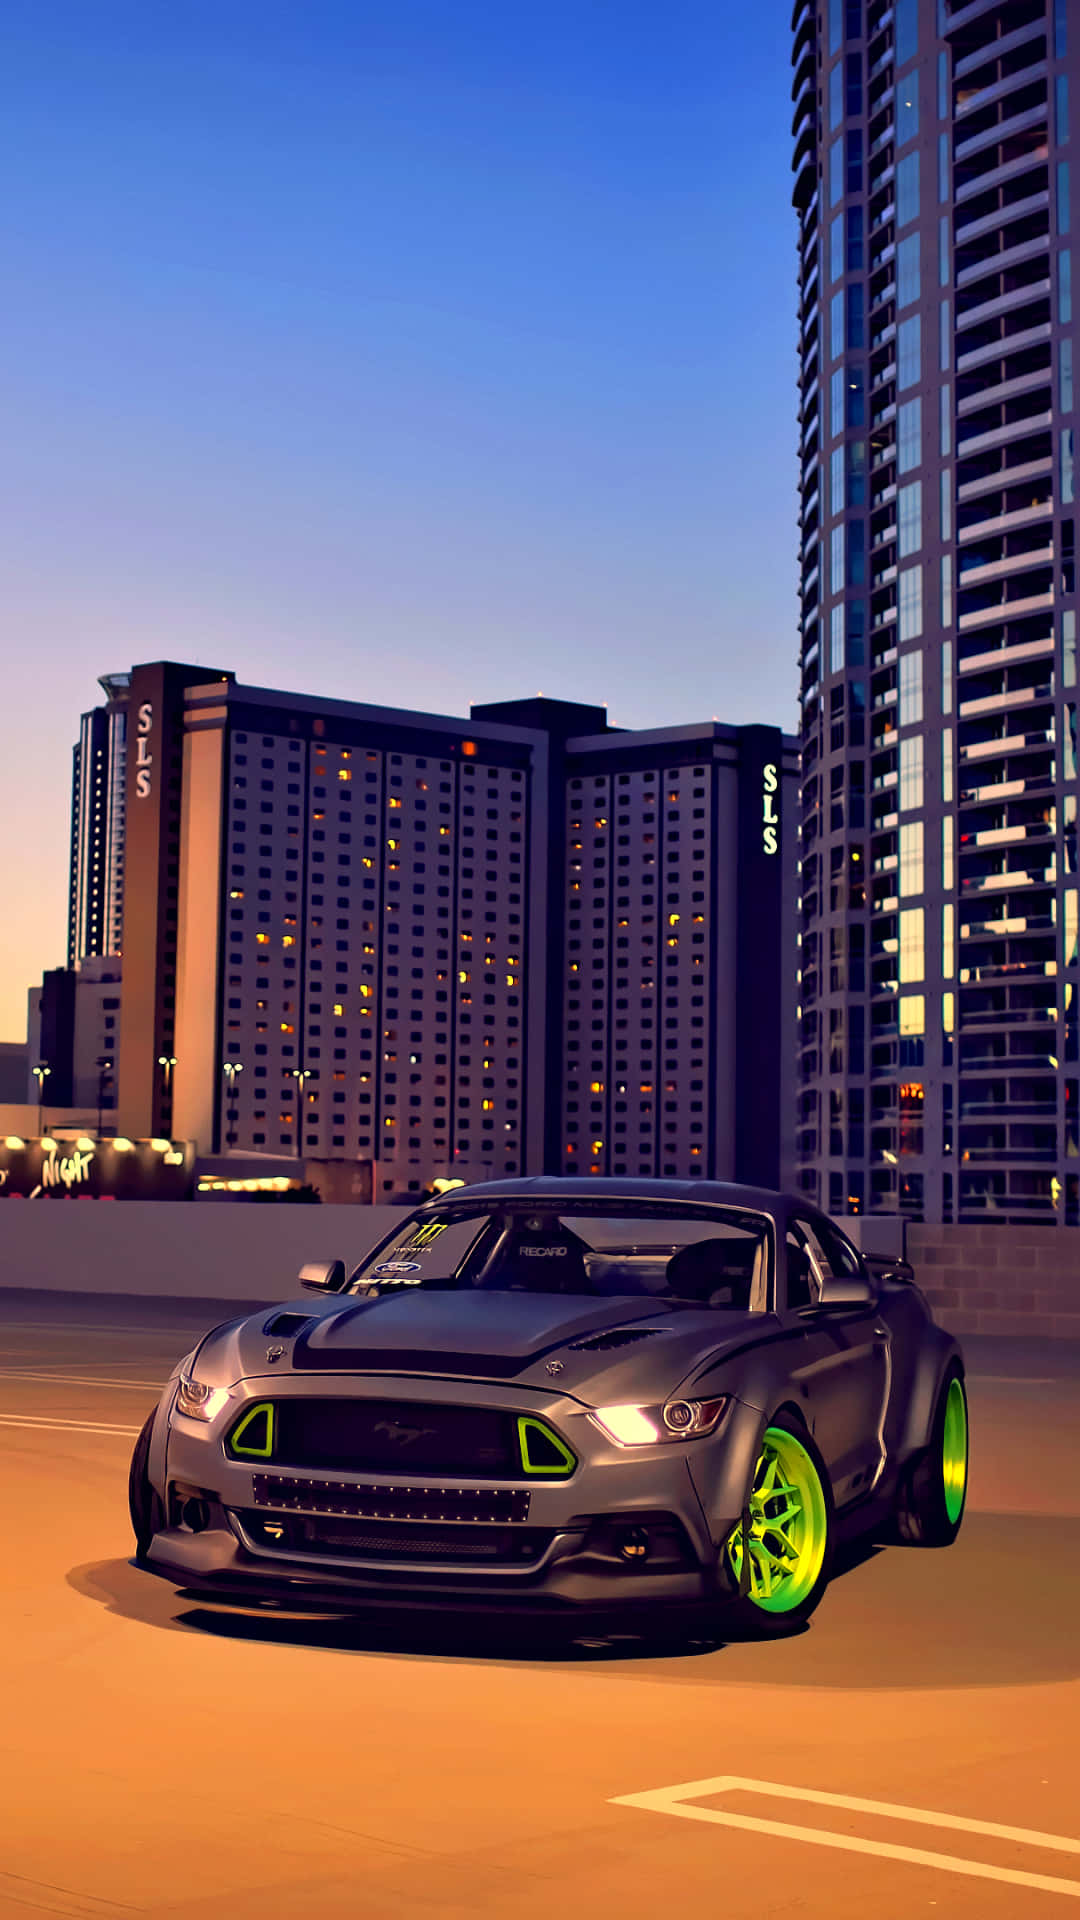 2015 RTR Ford Mustang During Dusk Wallpaper